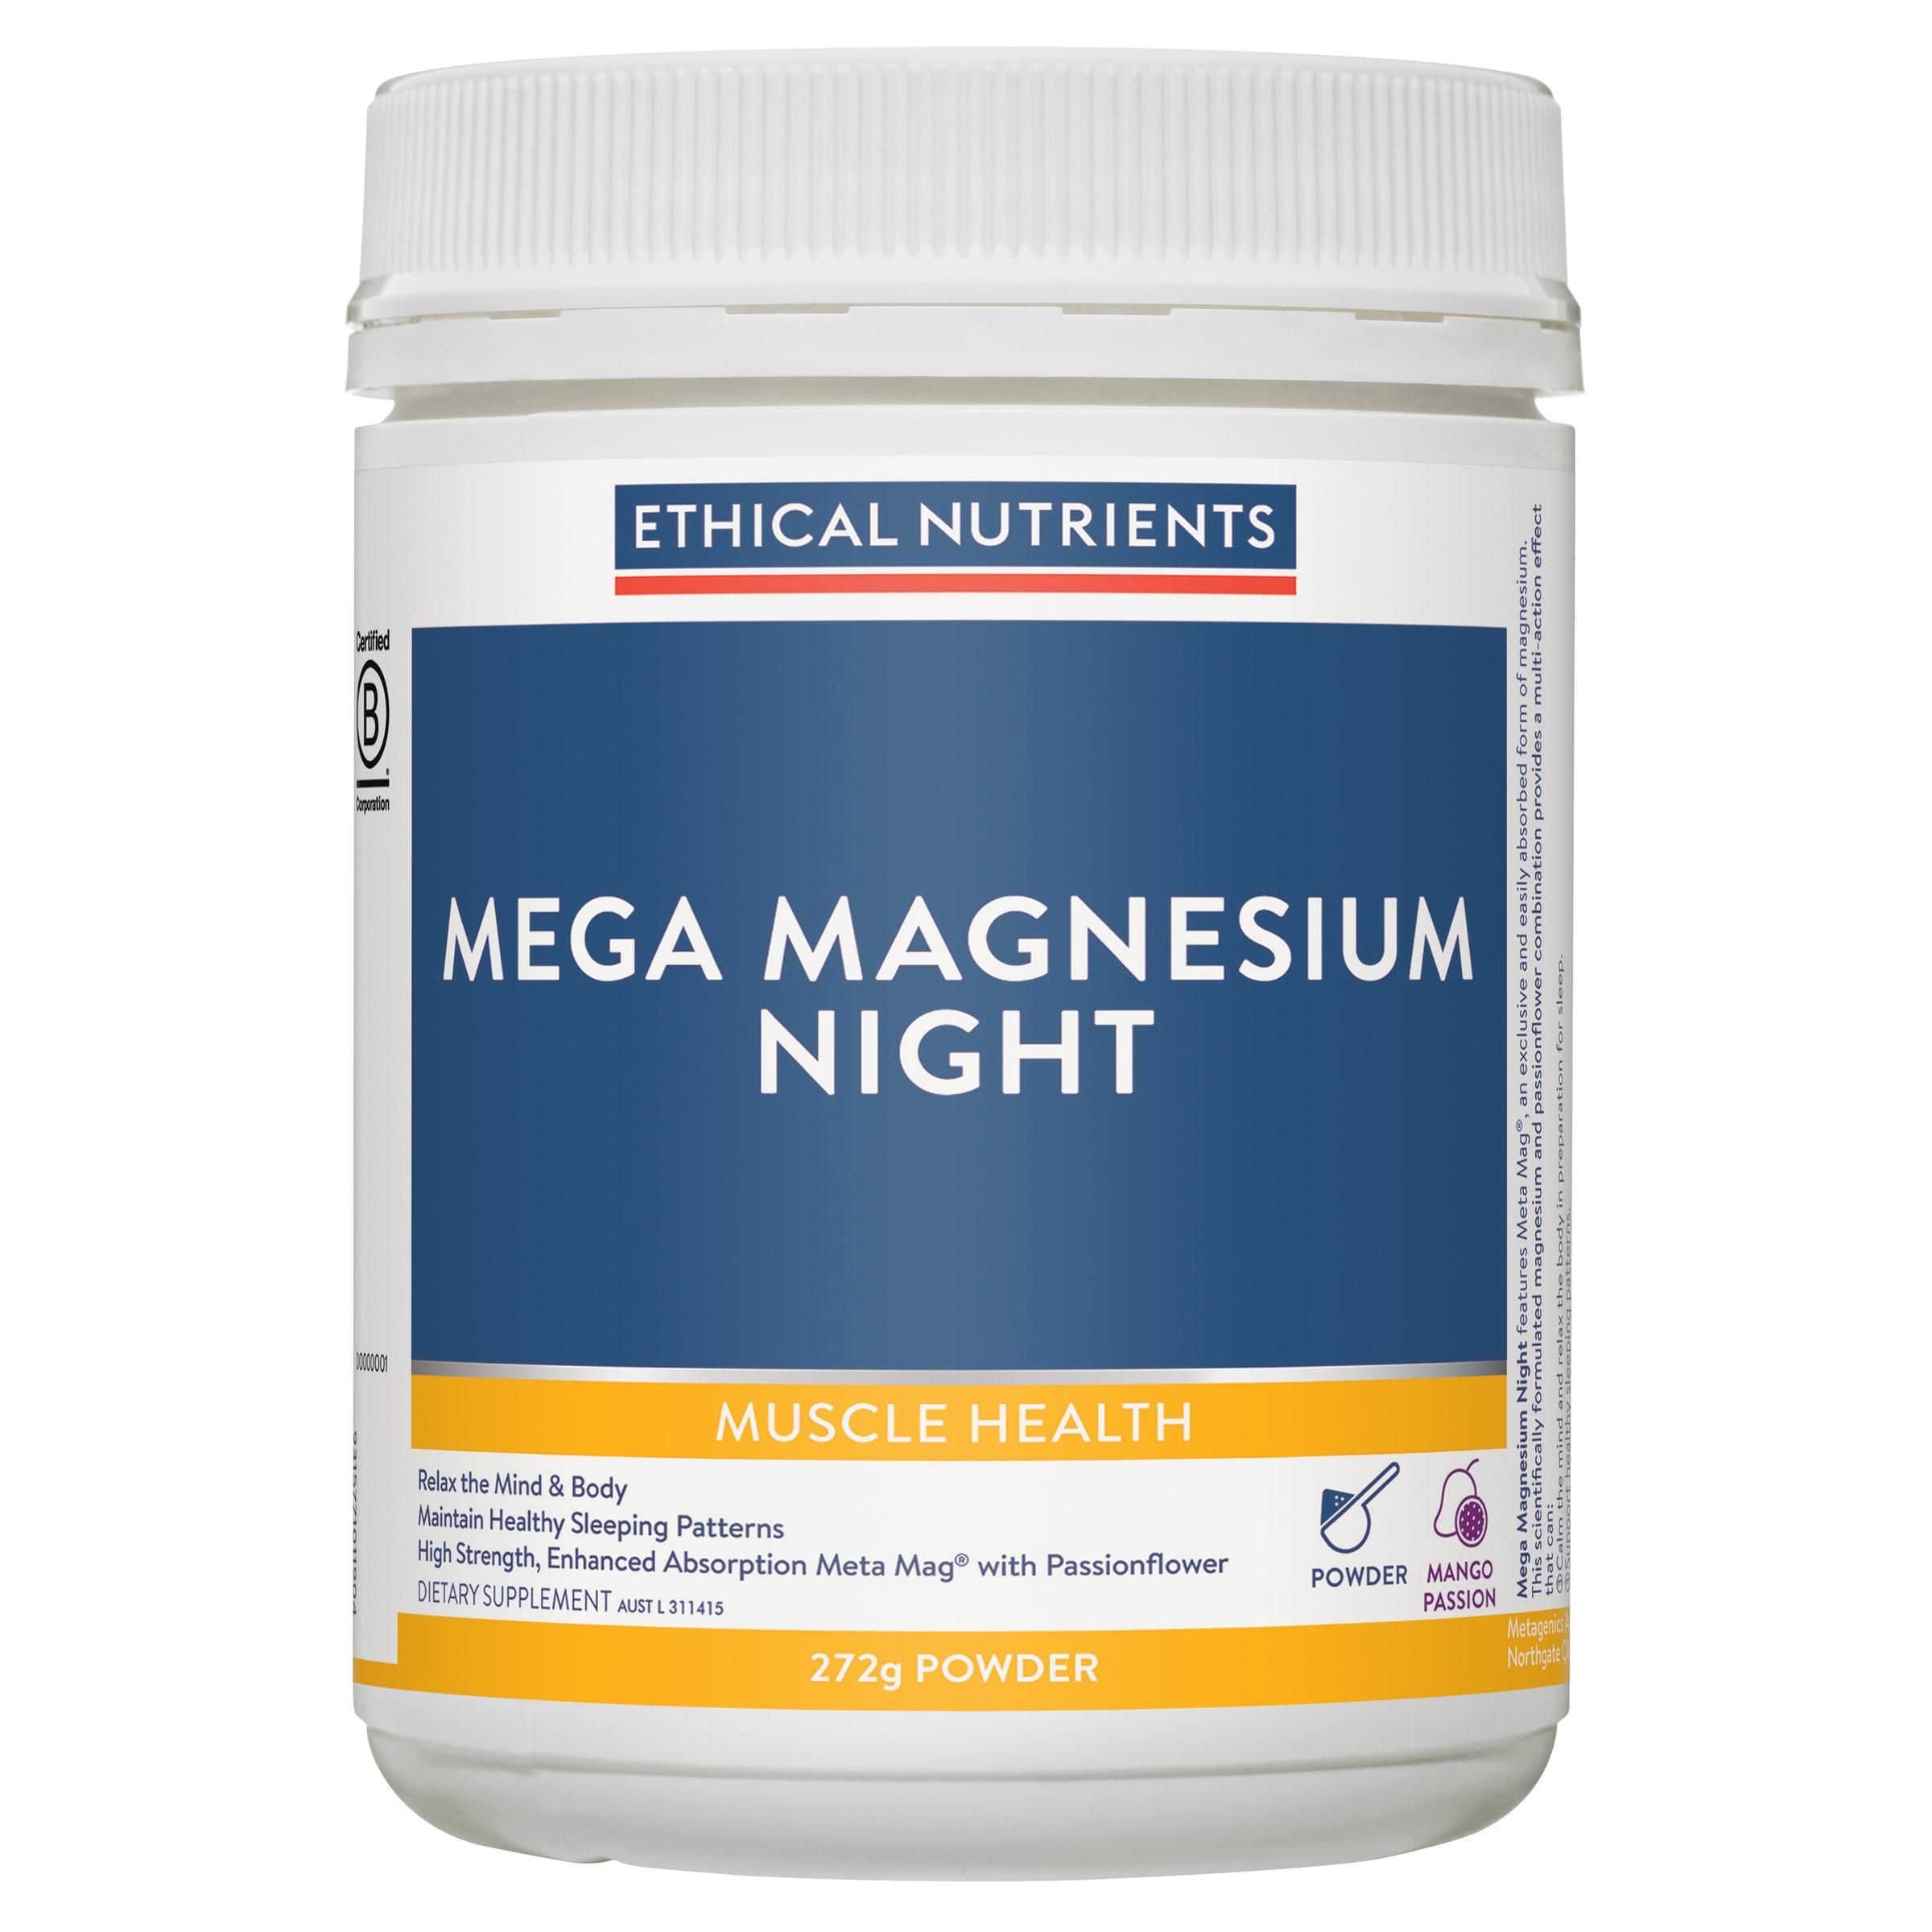 ETHICAL NUTRIENTS MEGA MAGNESIUM NIGHT POWDER 272G - Direct Chemist Outlet